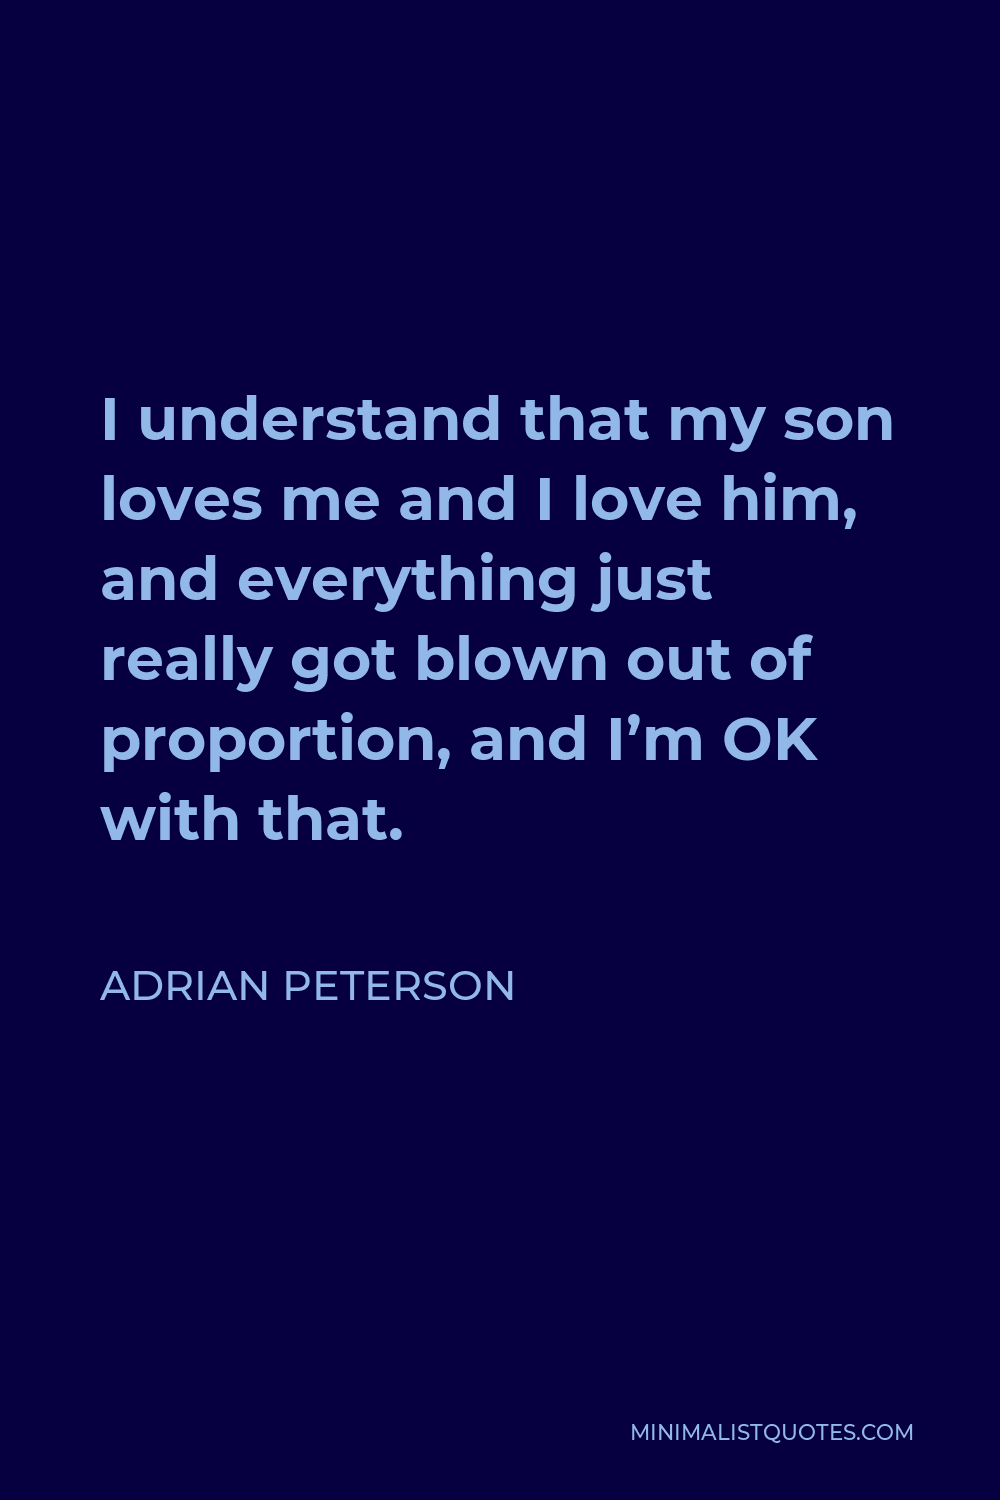 Adrian Peterson Quote - I understand that my son loves me and I love him, and everything just really got blown out of proportion, and I’m OK with that.